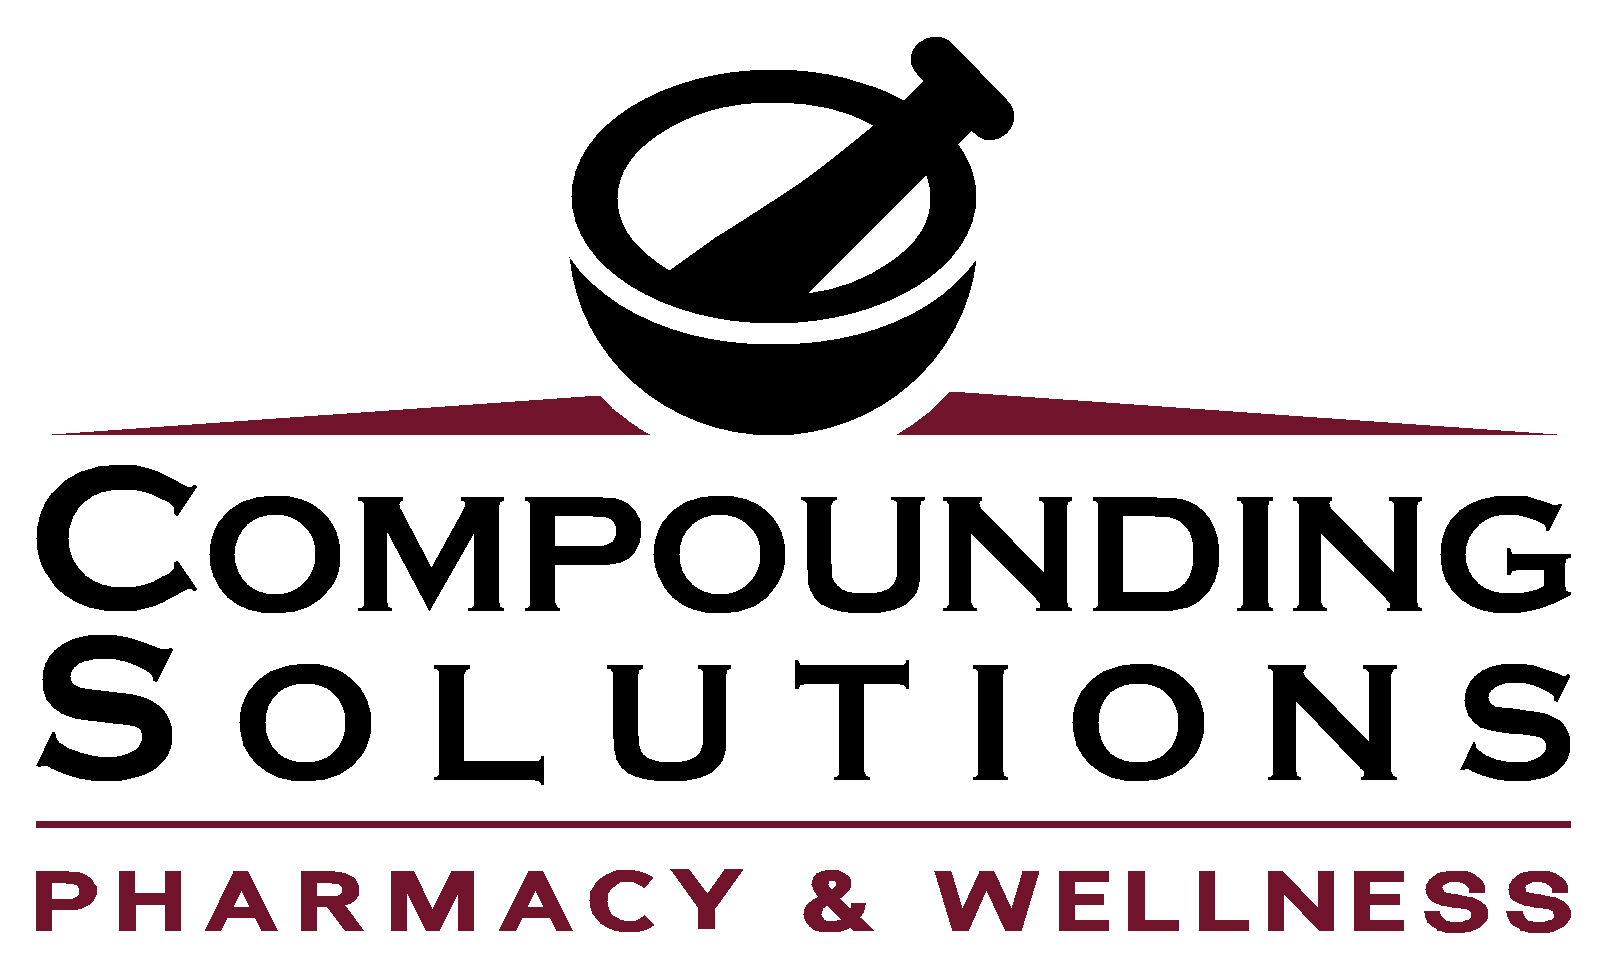 Compounding Solutions Pharmacy & Wellness